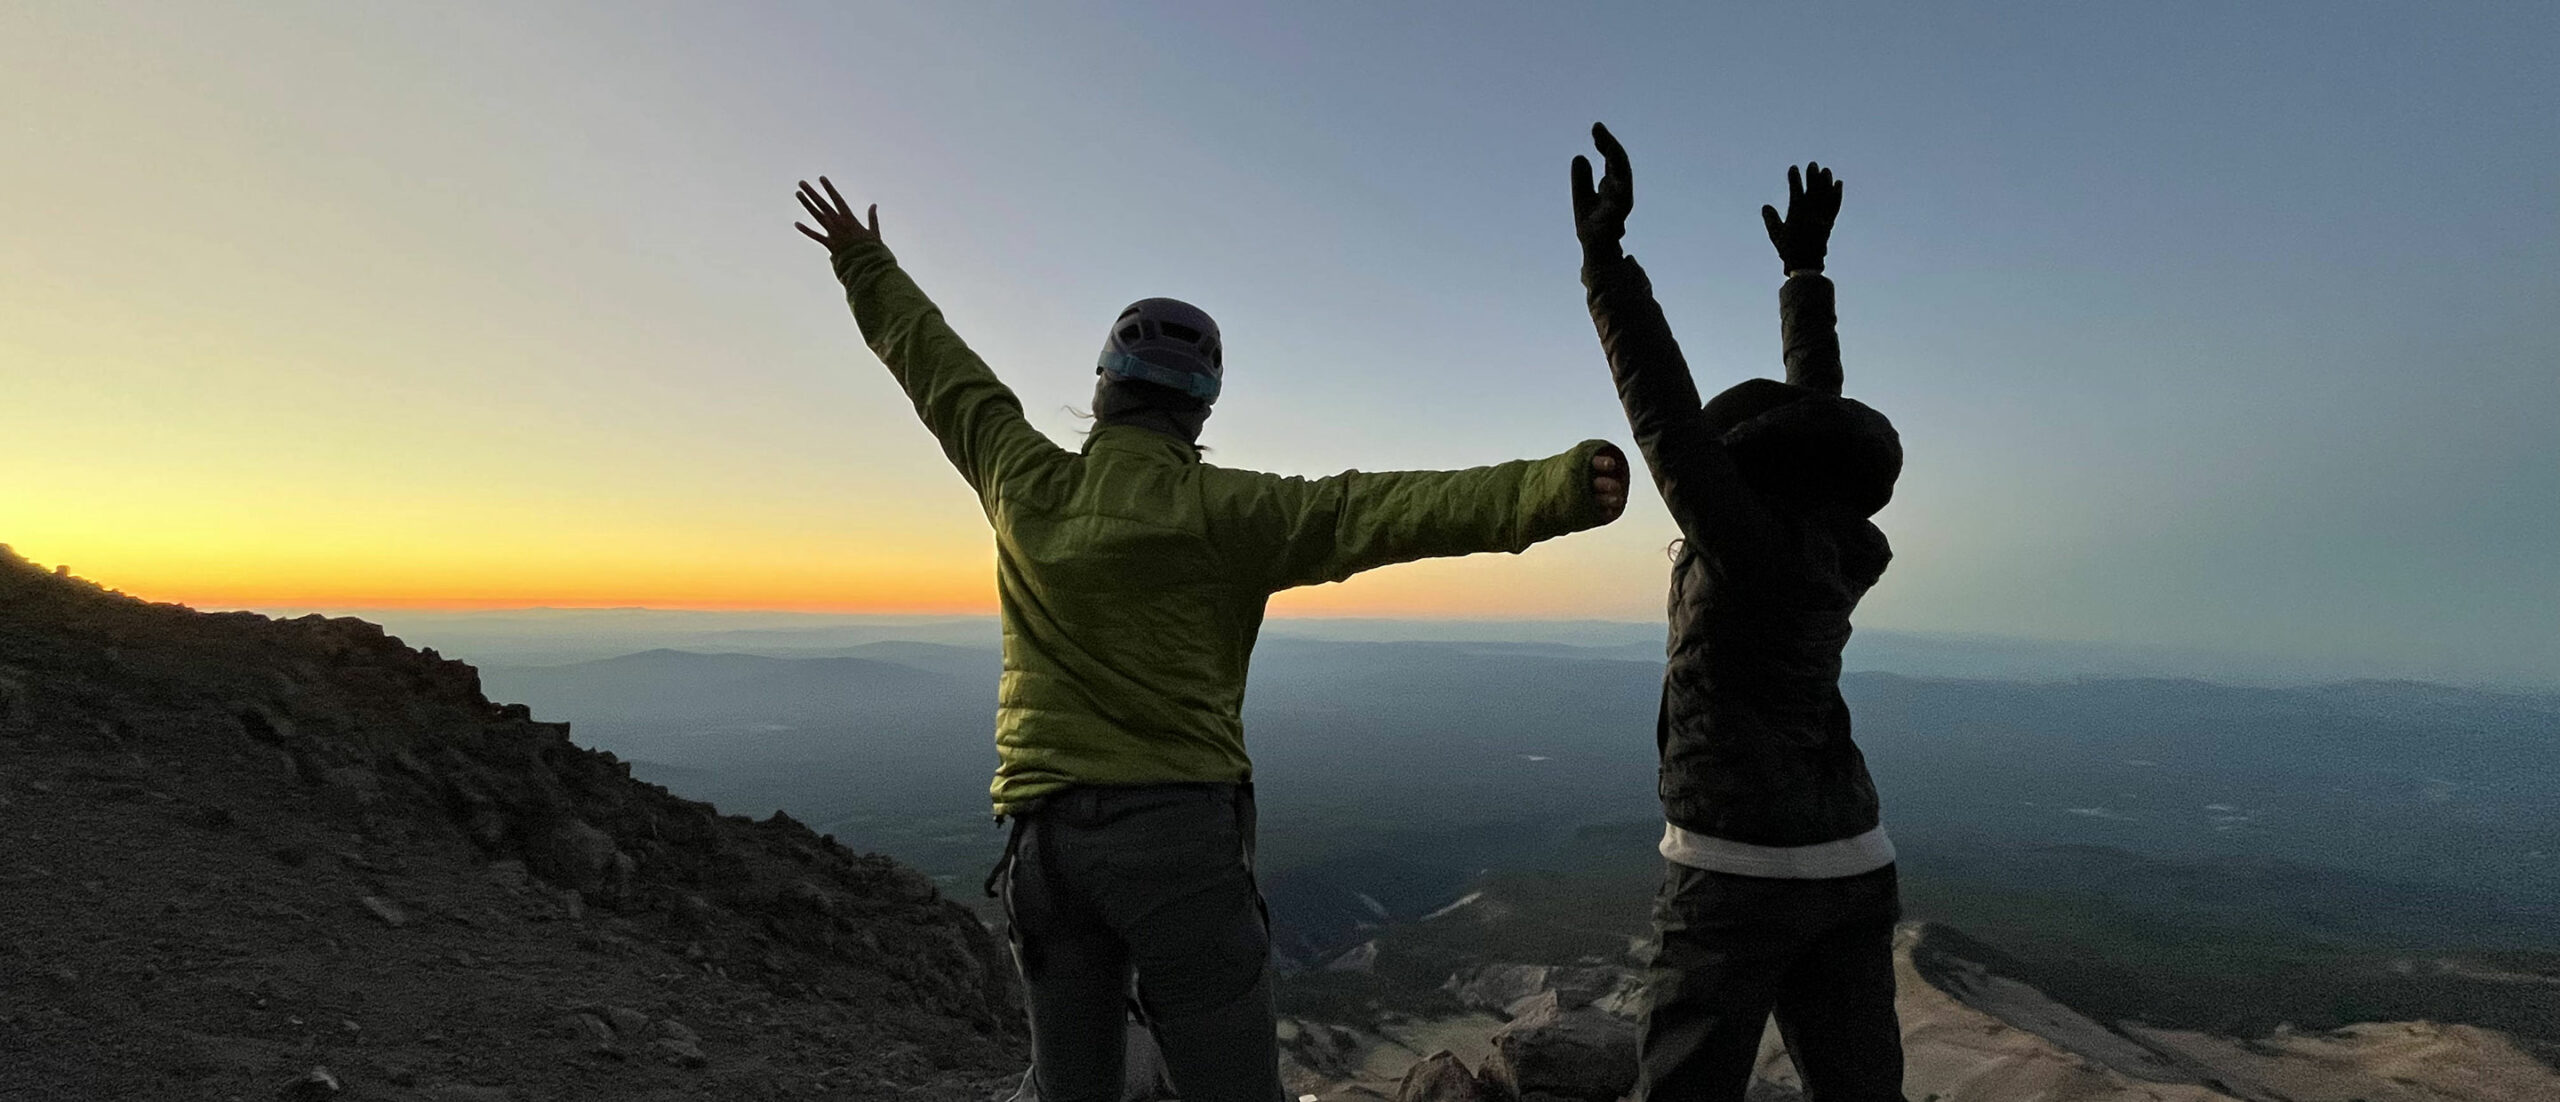 teenagers standing on top of the mountain mount shasta with arms raised at sunrise